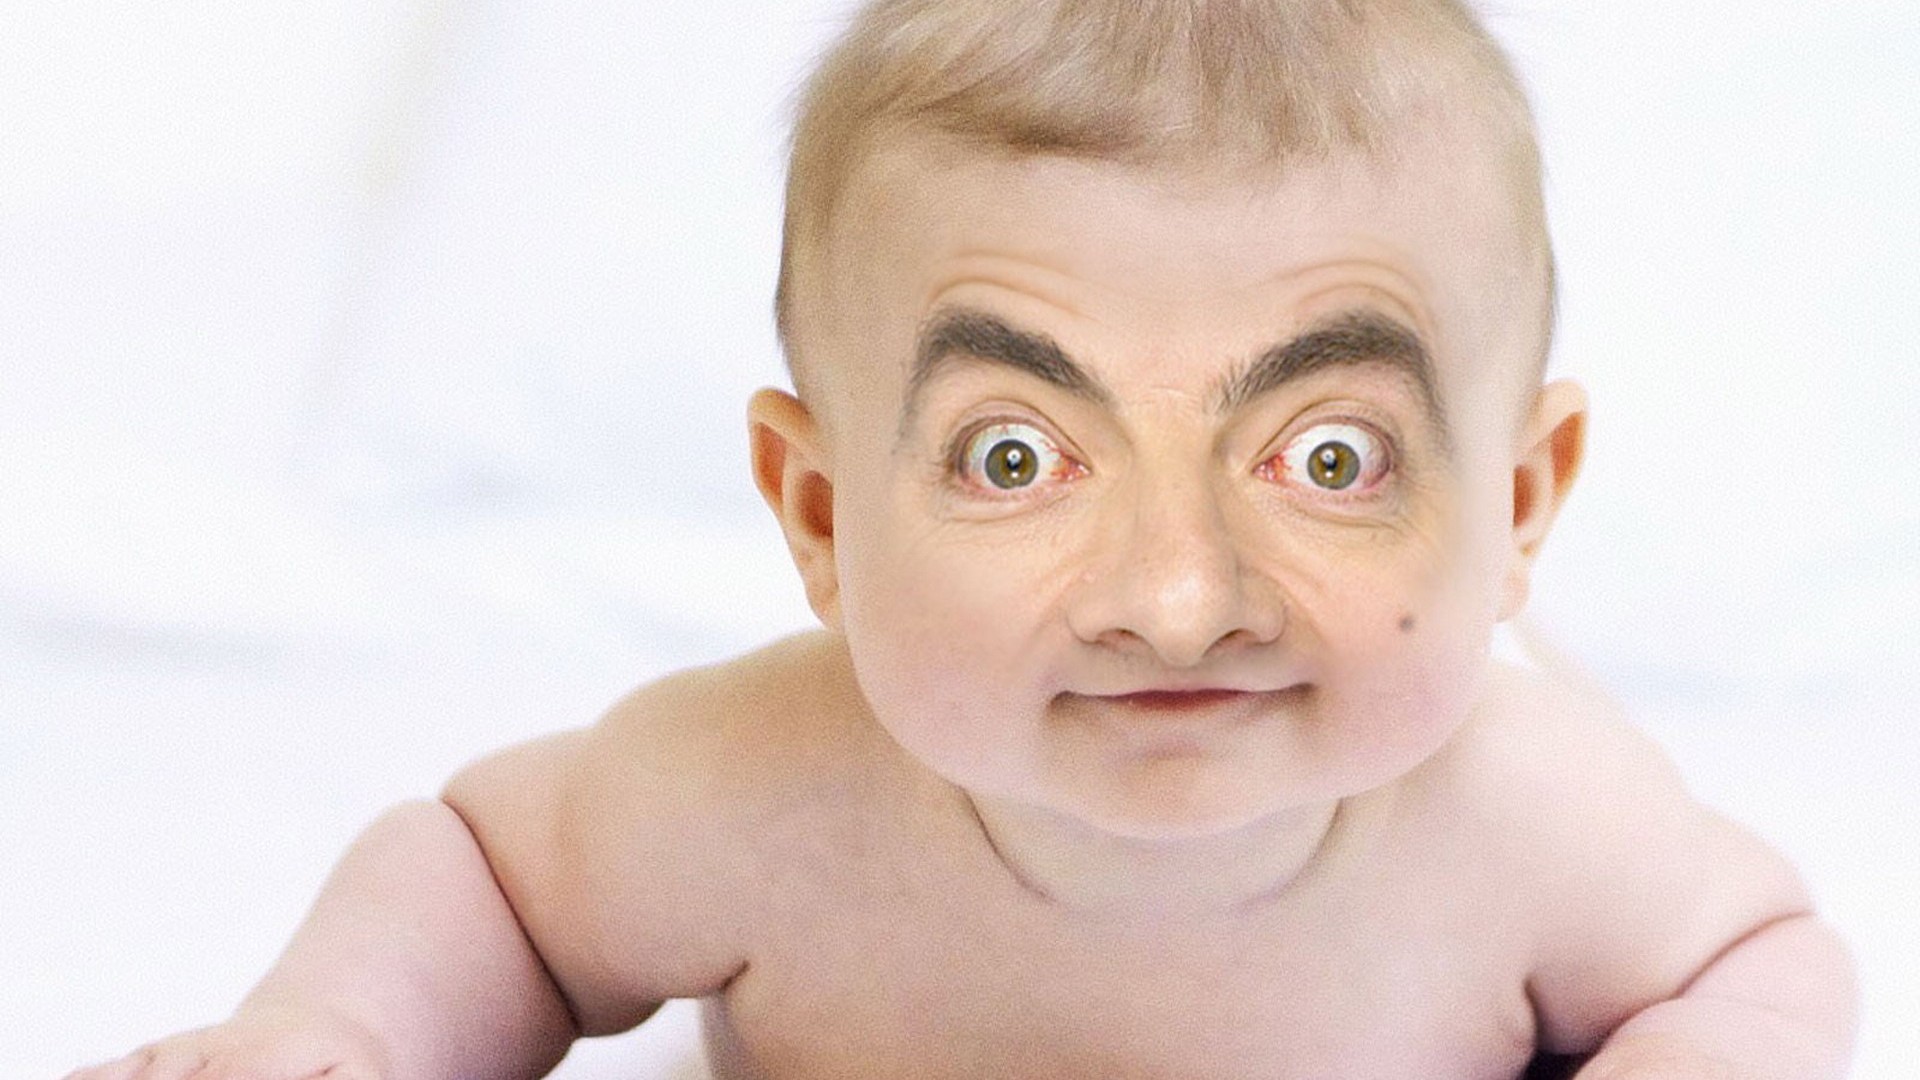 Mr.-Bean-Funny-Baby-Face-Picture